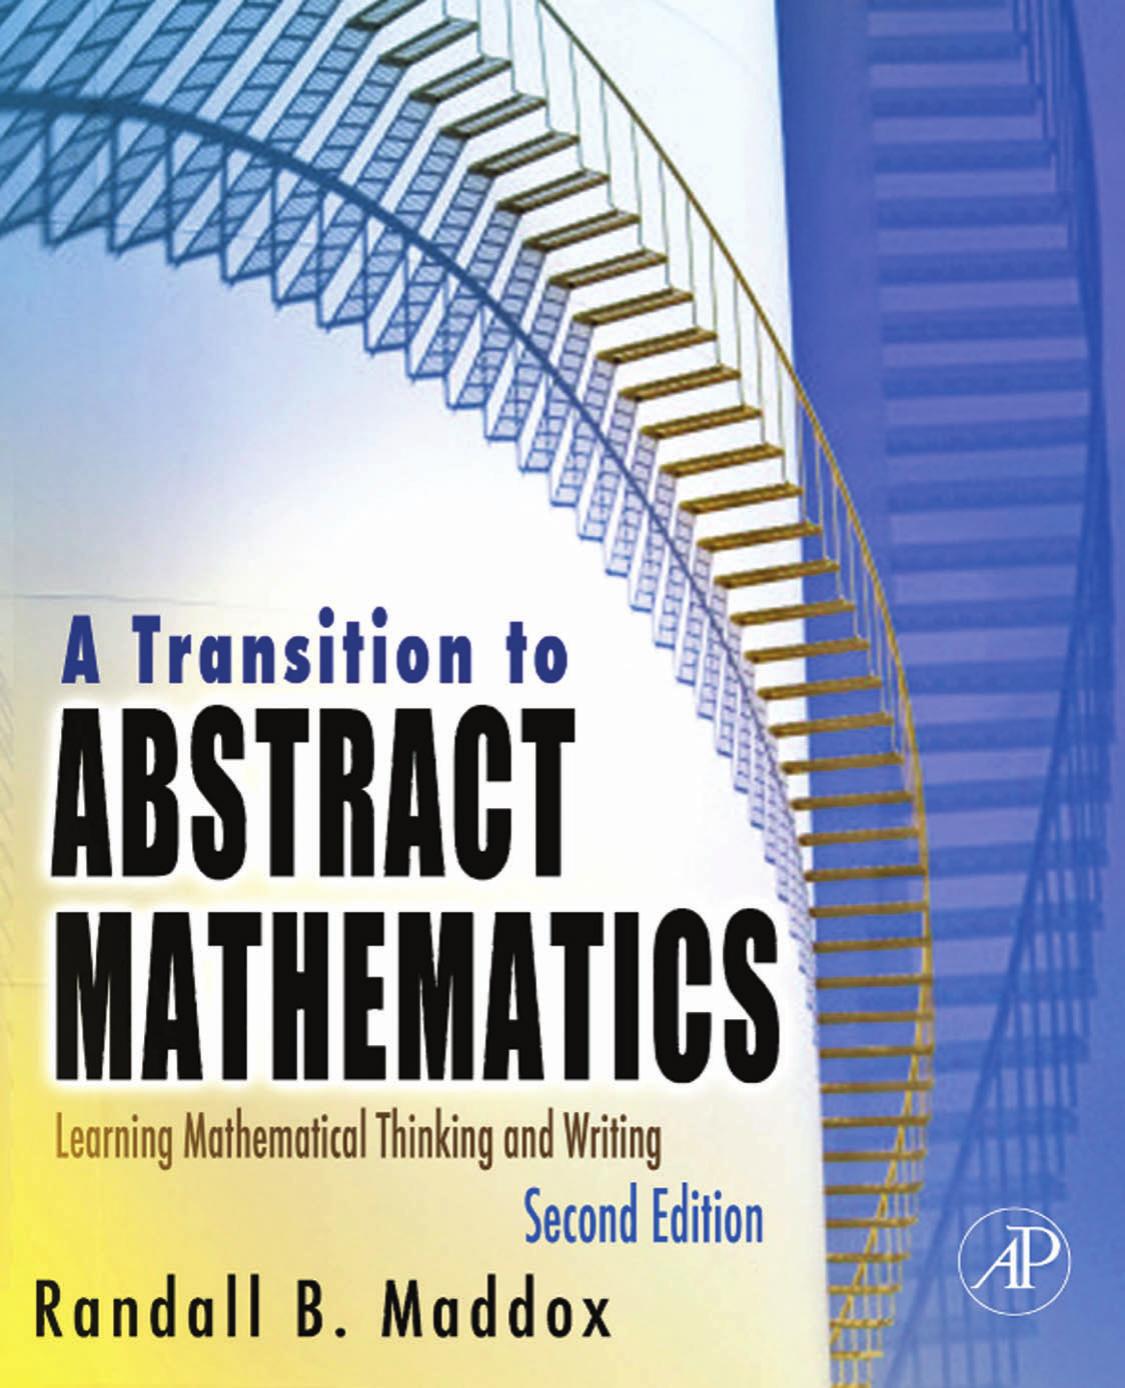 A Transition to Abstract Mathematics: Learning Mathematical Thinking and Writing